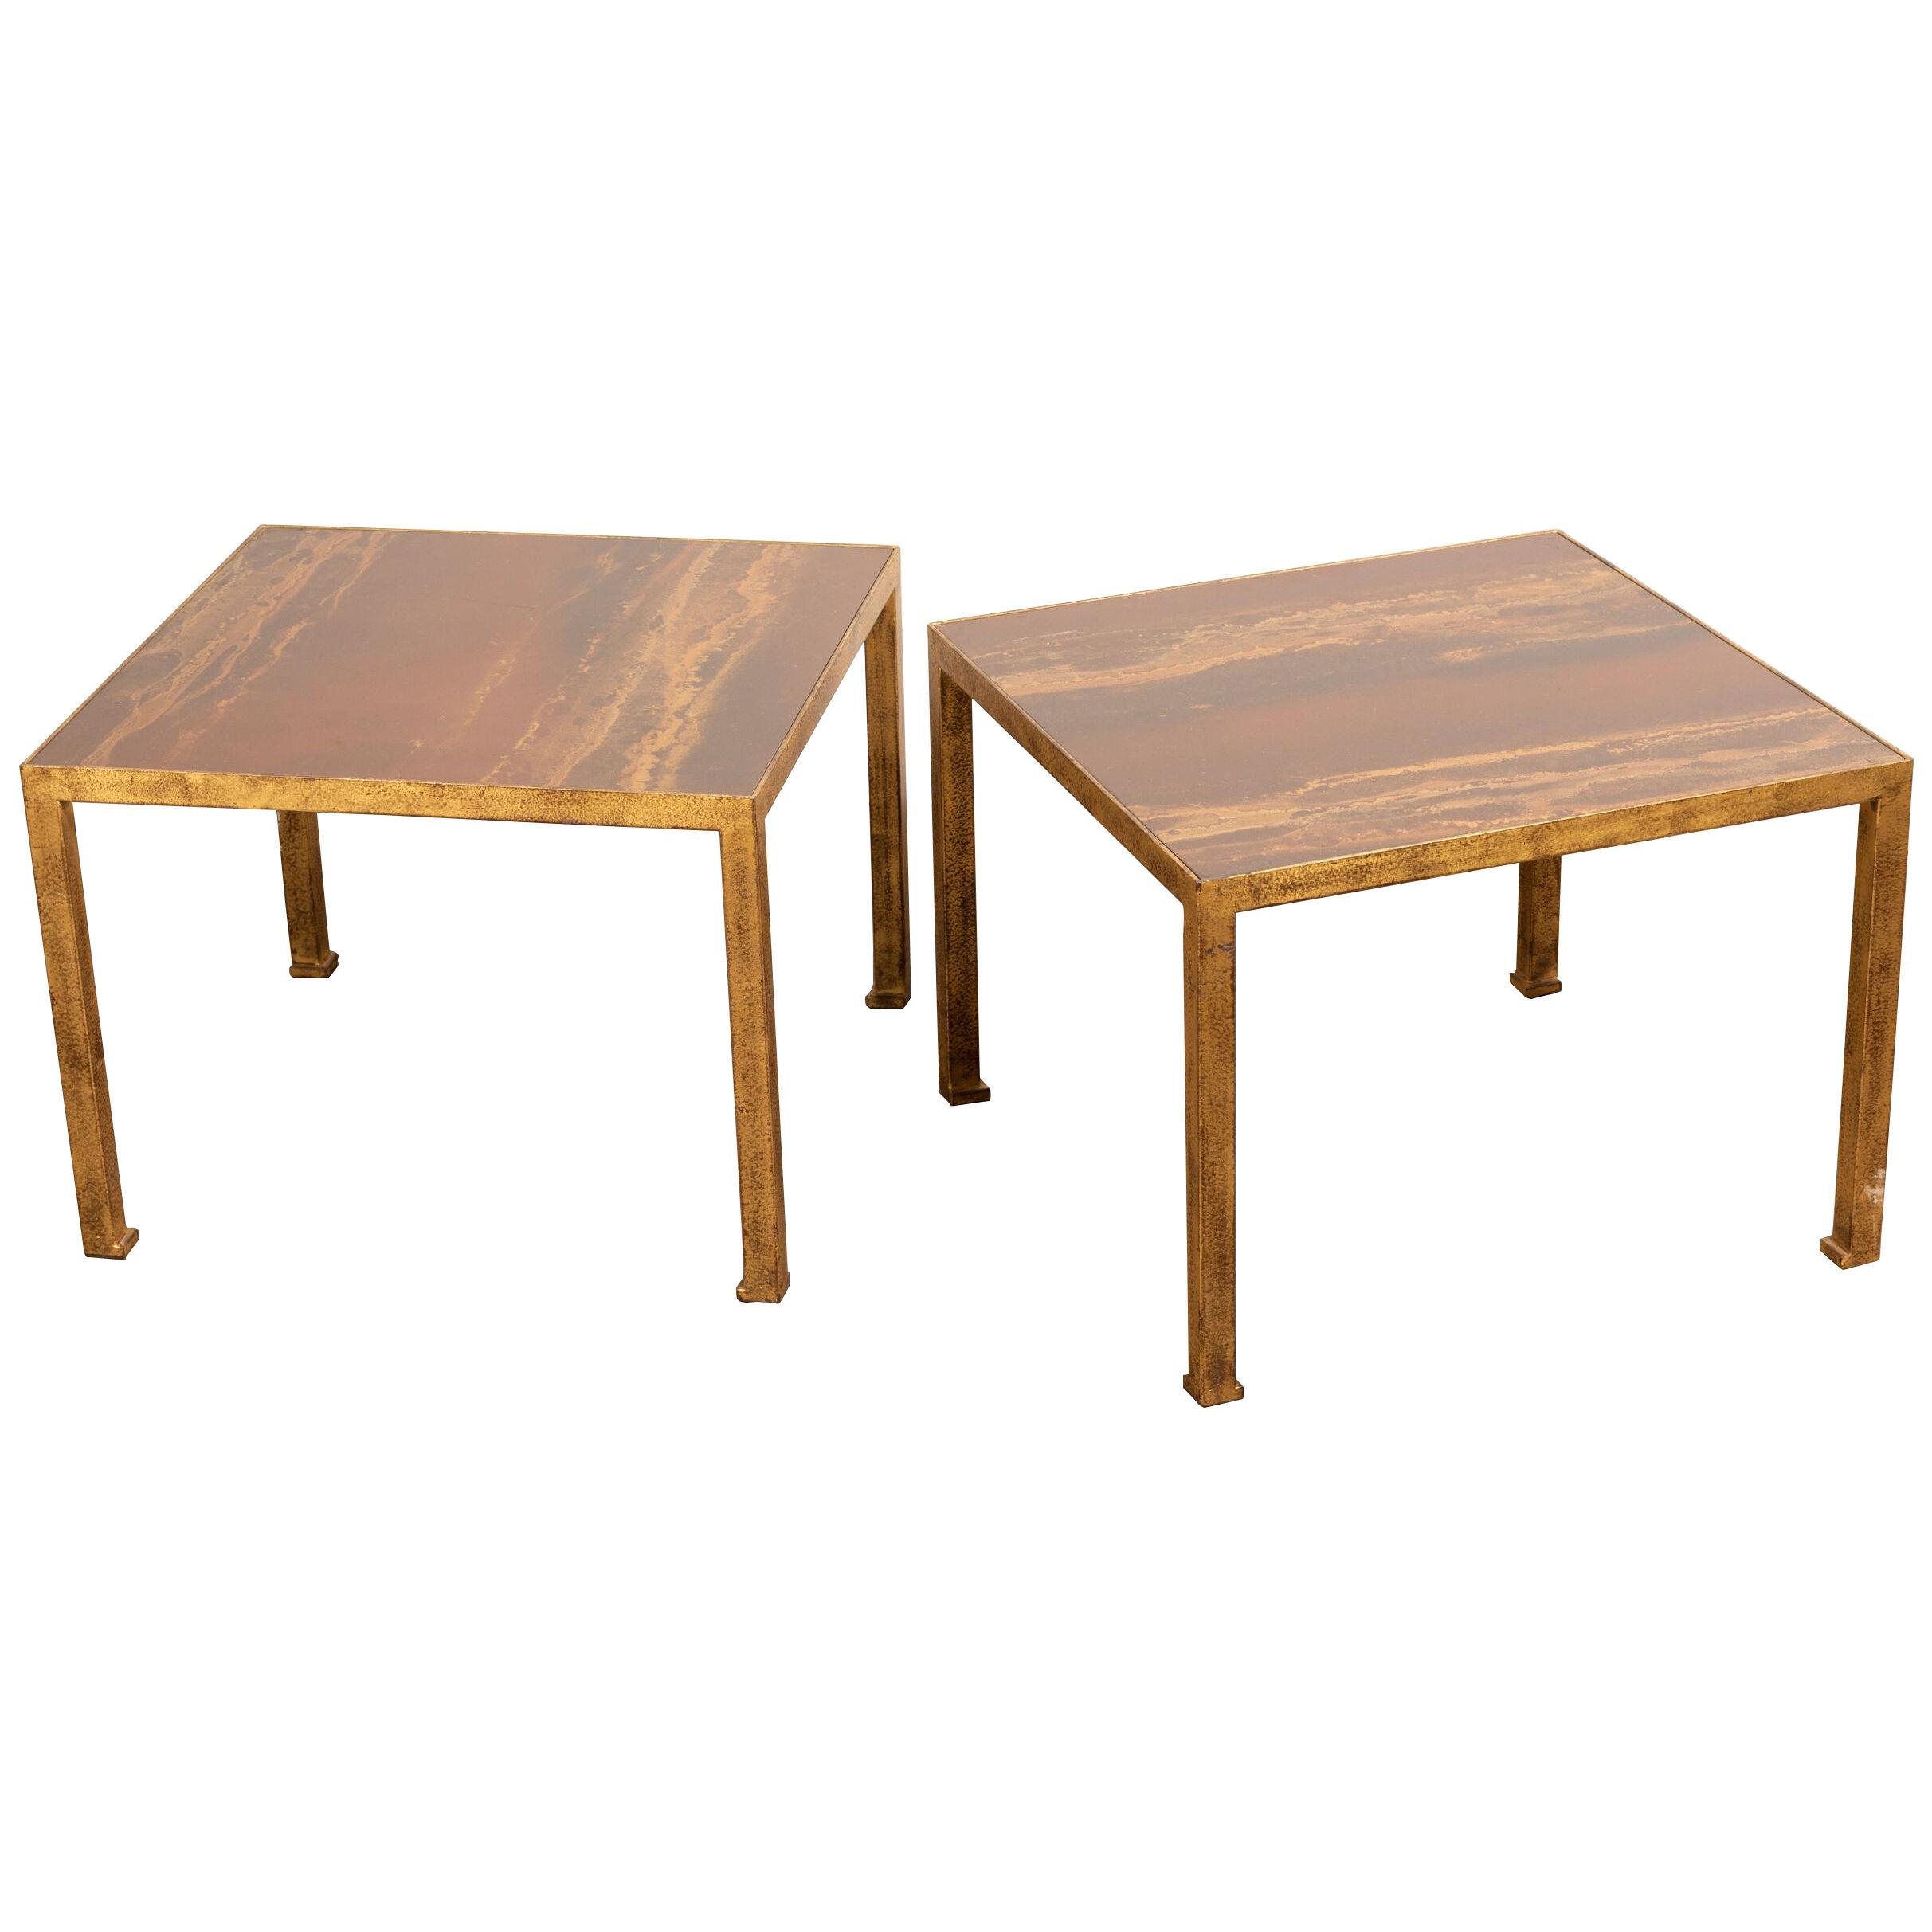 Pair of Square End Tables, by Maison Jansen